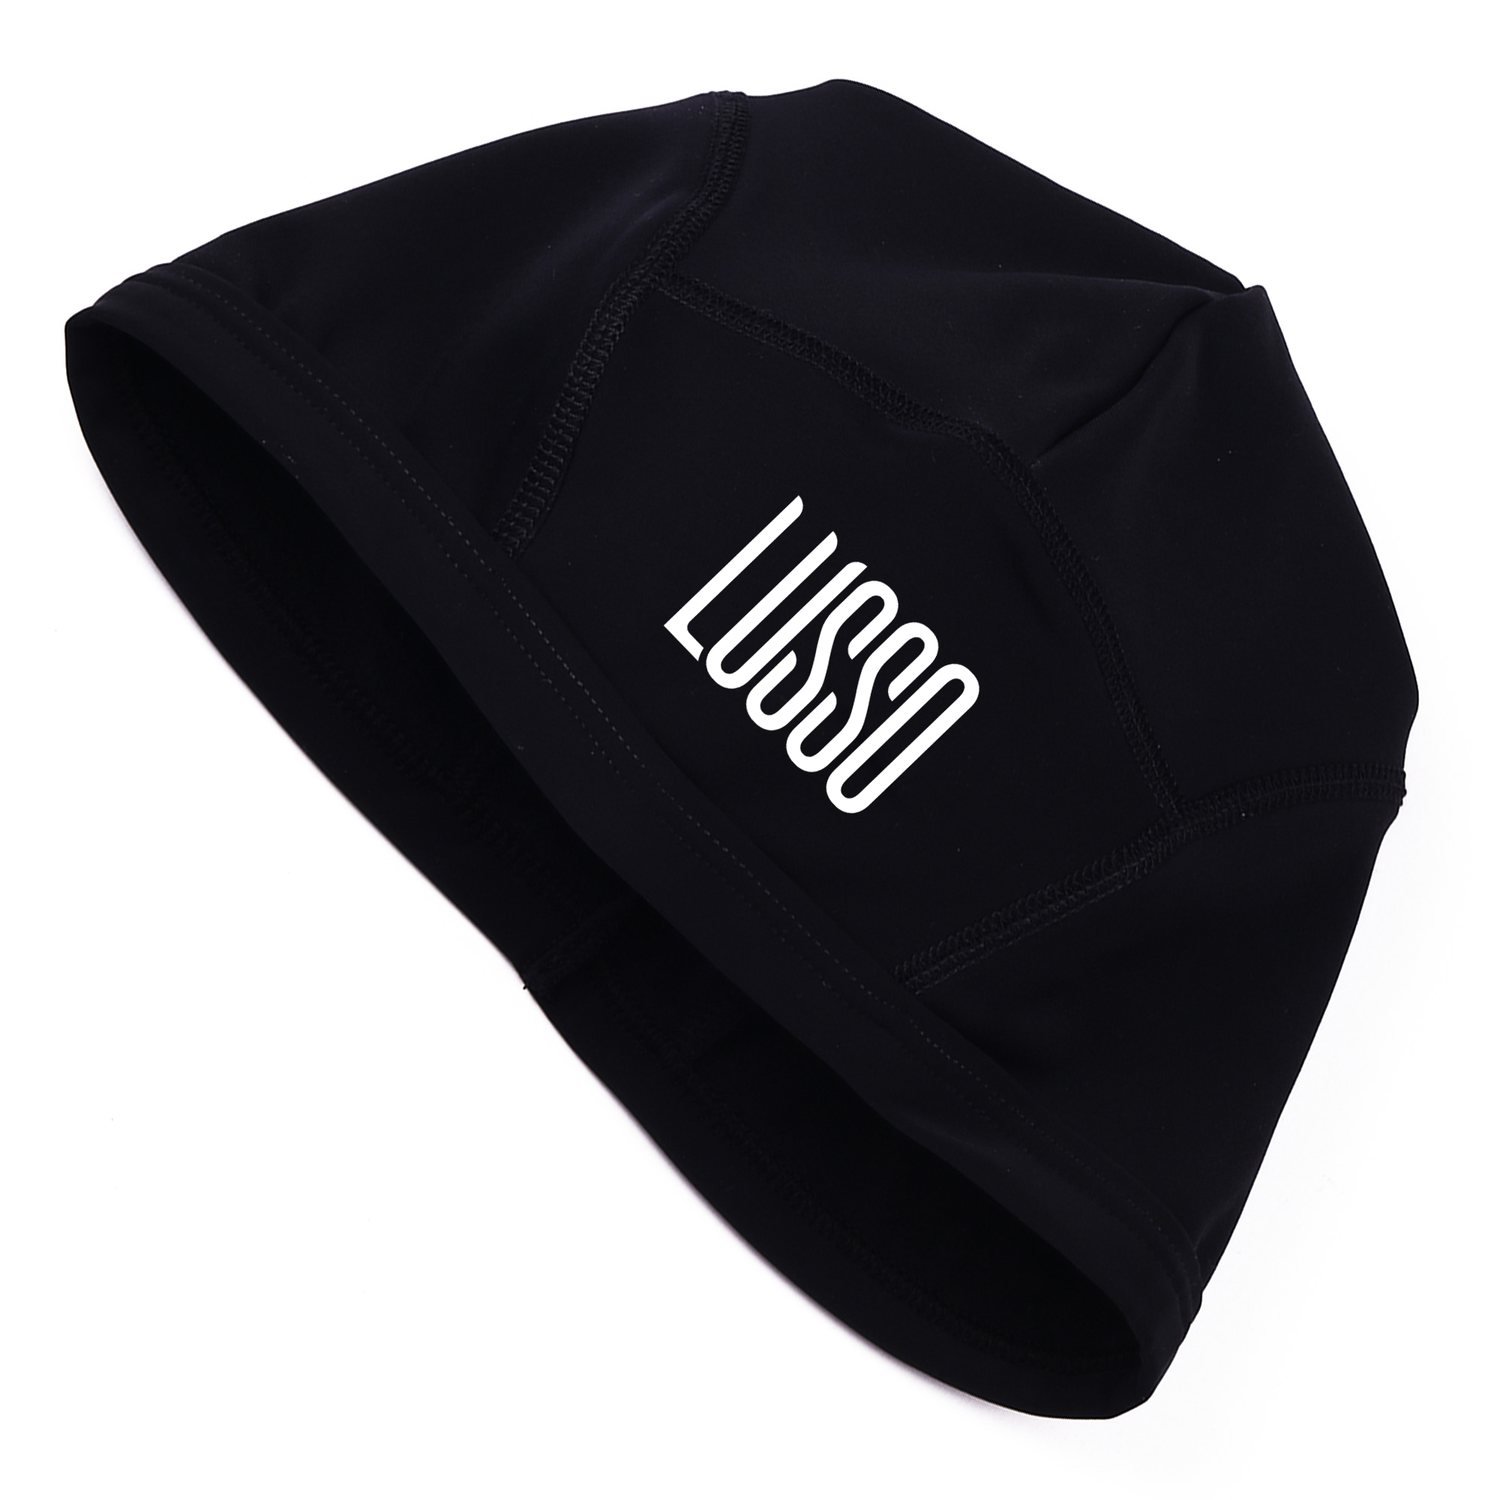 All Mens | Lusso Cycling